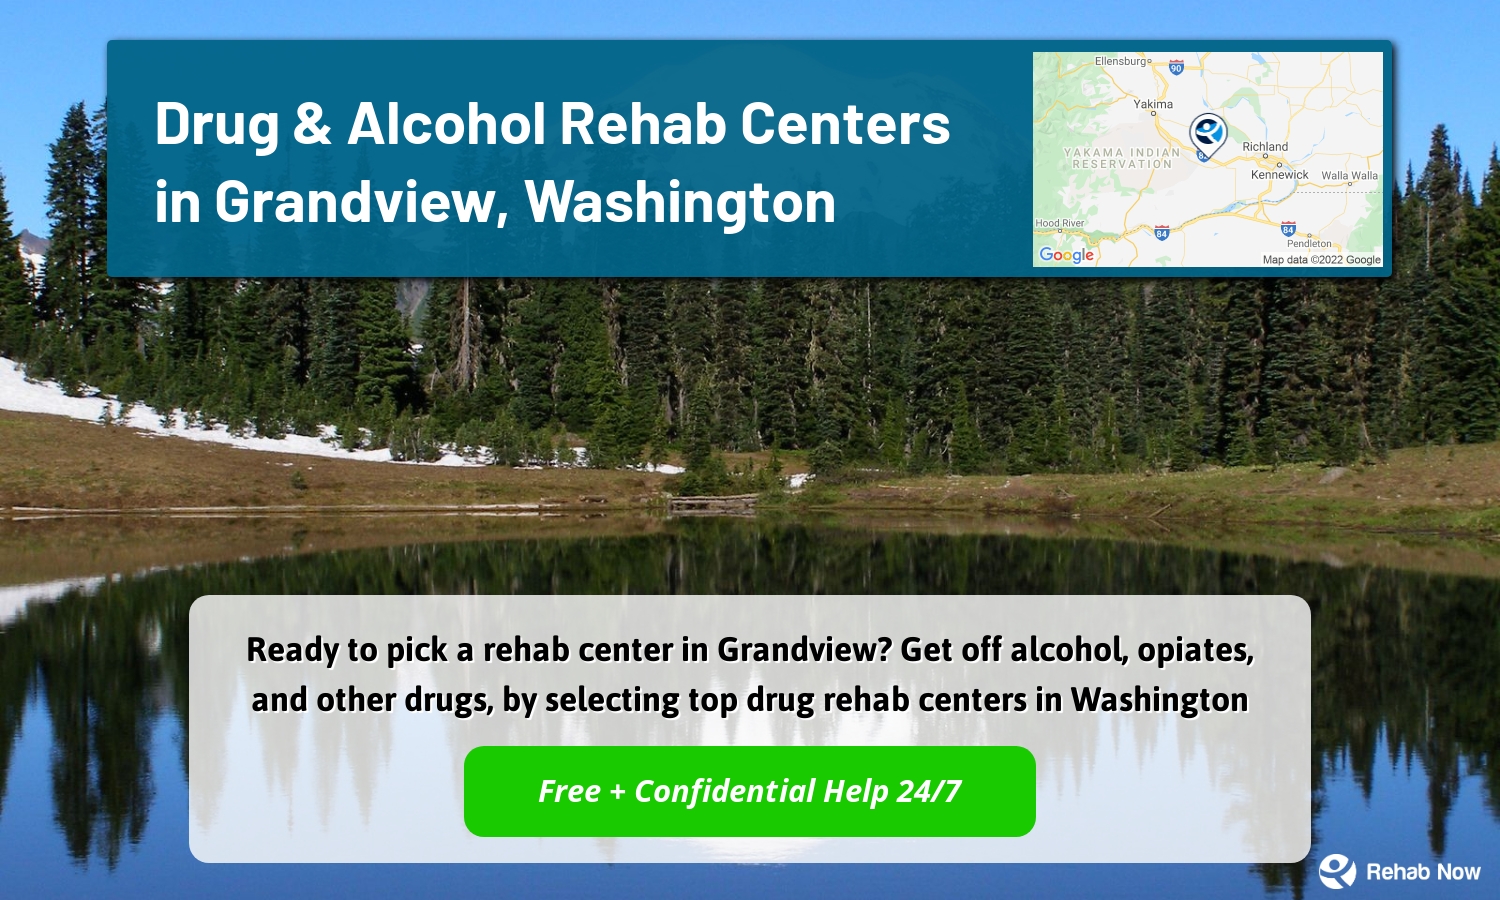 Ready to pick a rehab center in Grandview? Get off alcohol, opiates, and other drugs, by selecting top drug rehab centers in Washington